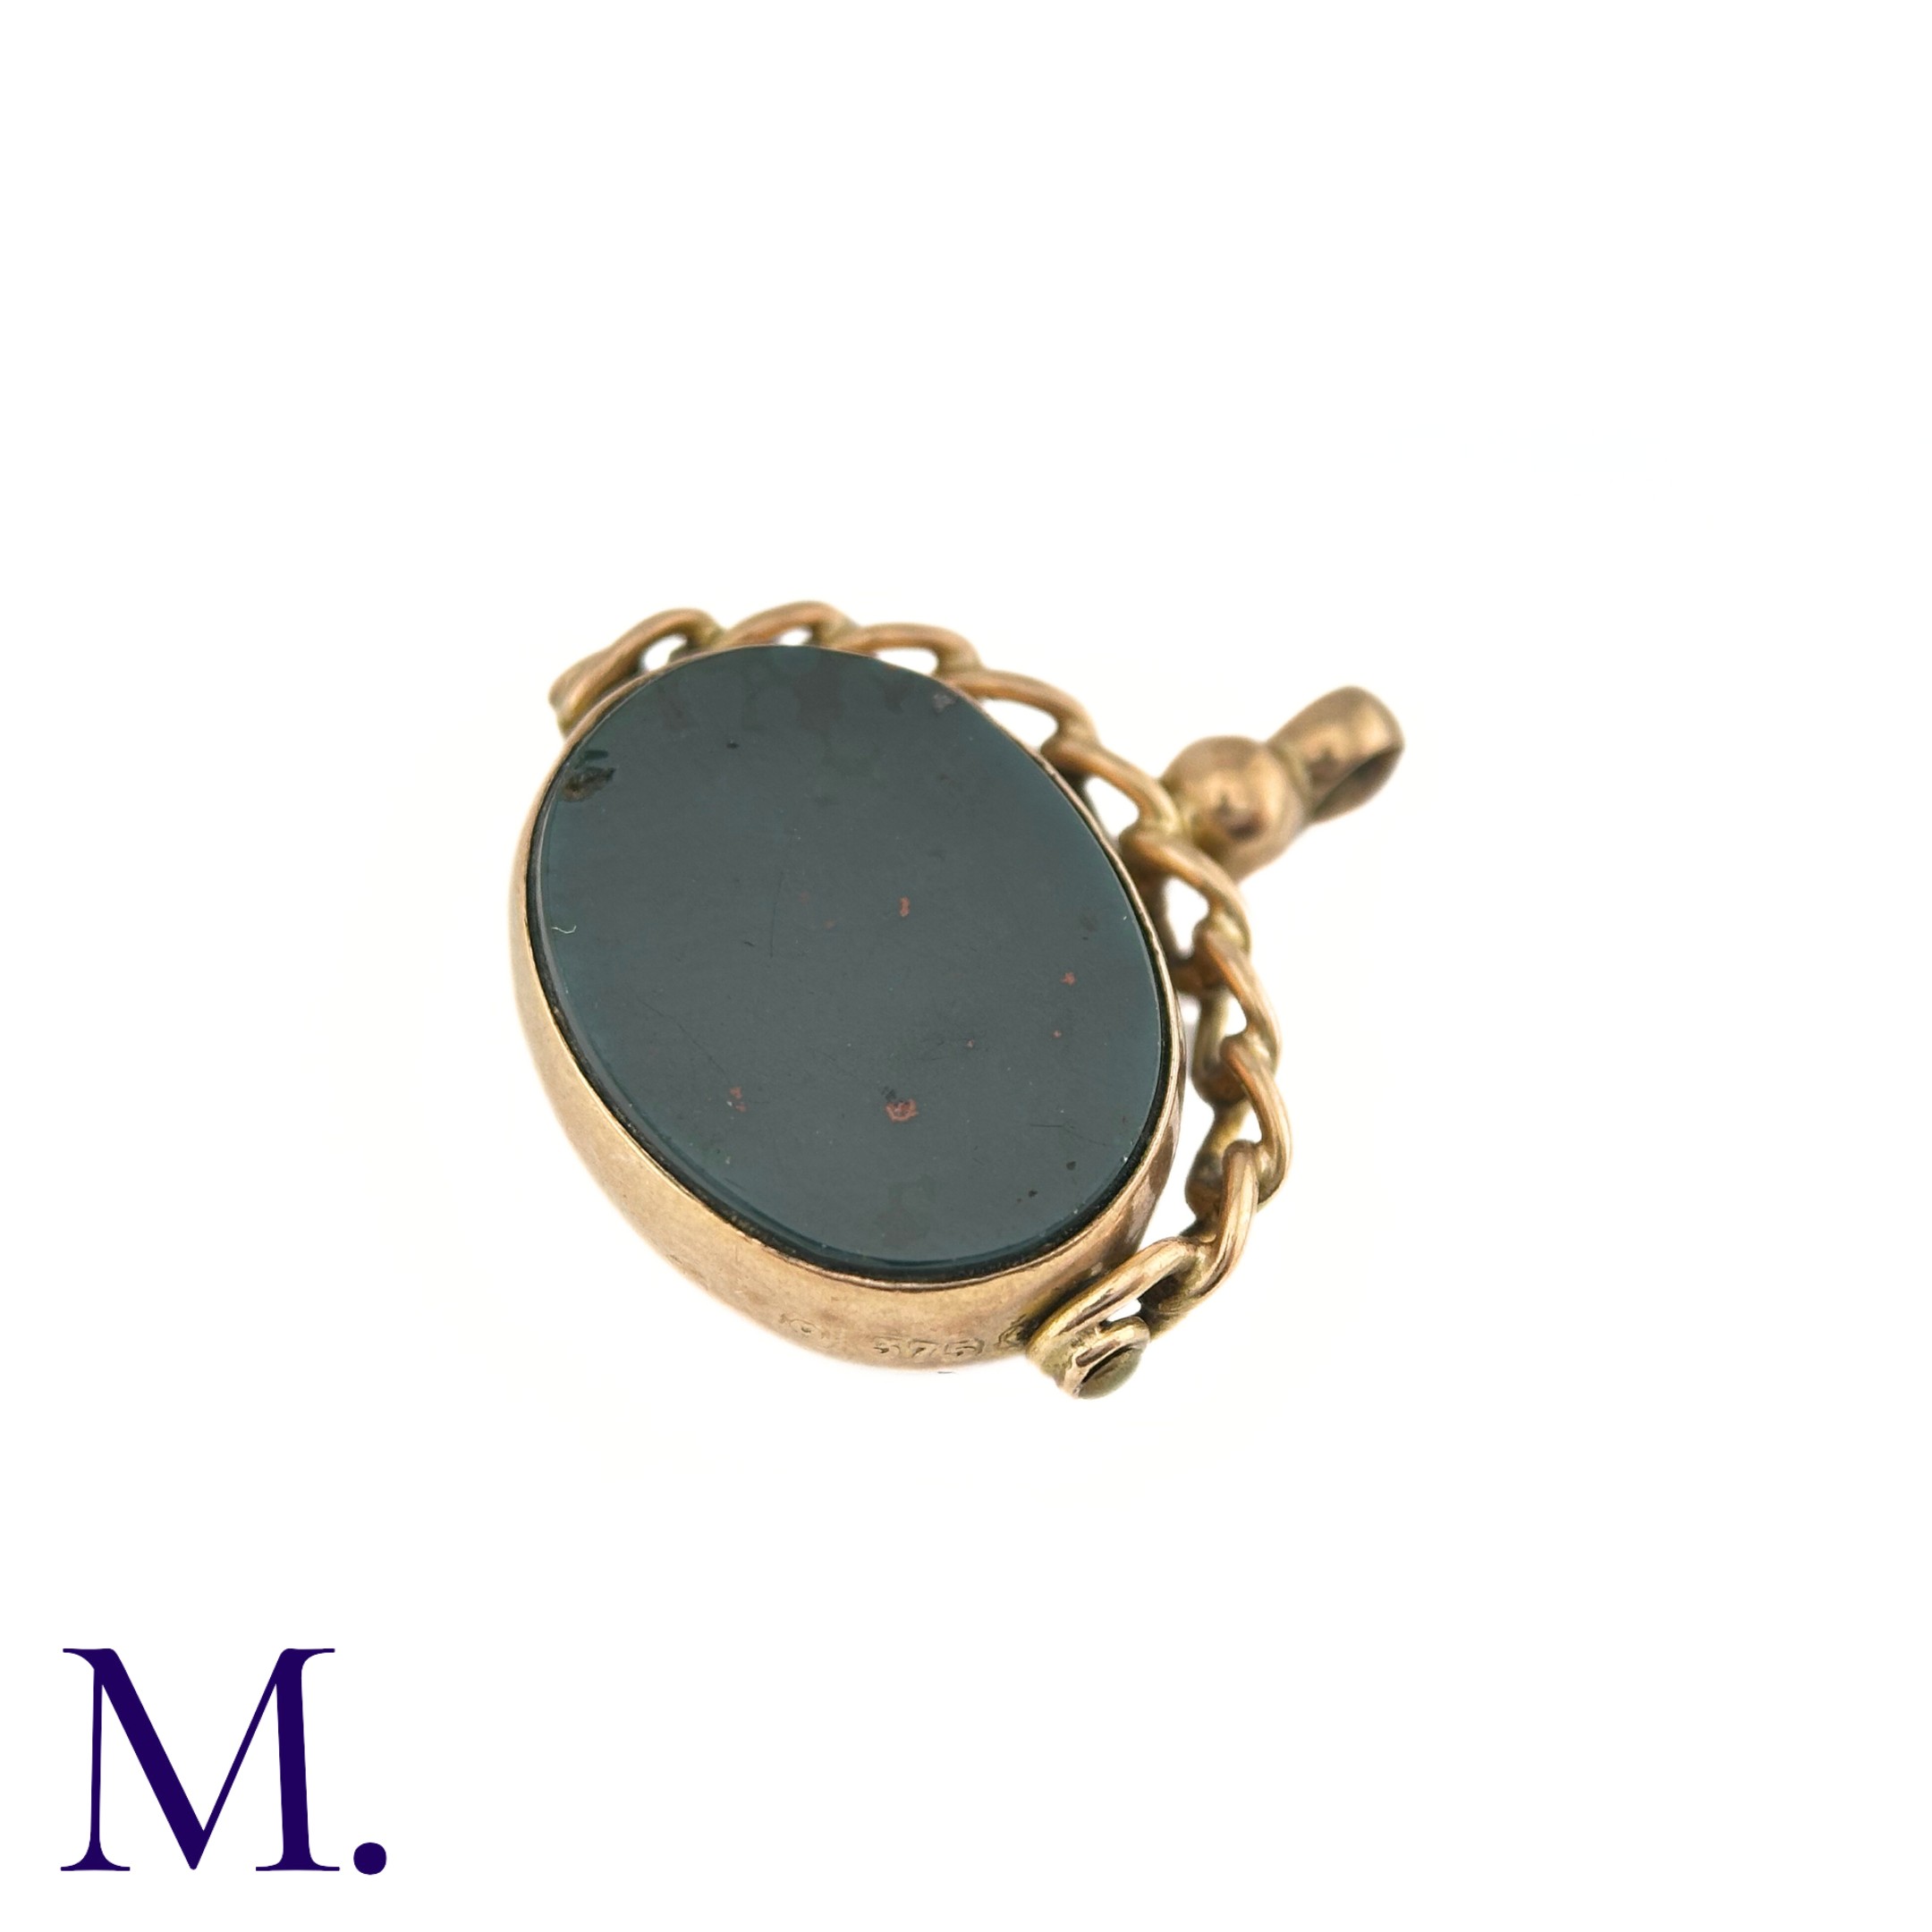 An Antique Miniature and Bloodstone Spinning Fob The 9ct rose gold spinning fob is set with an - Image 6 of 6